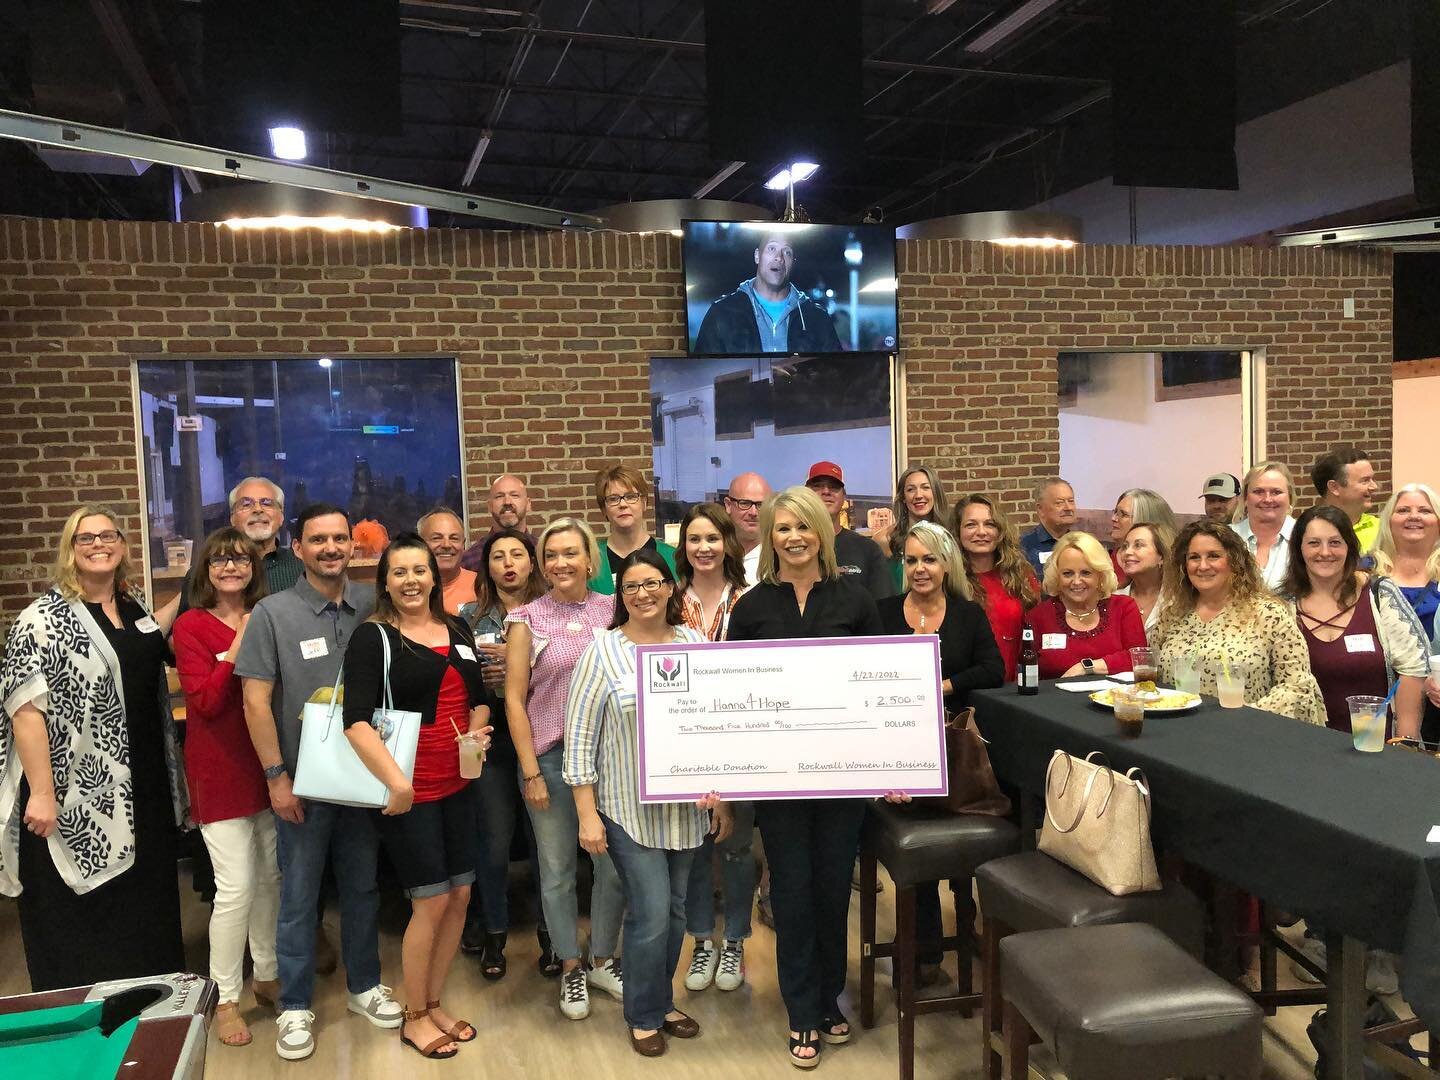 Thank you to the Rockwall Women in Business!! We are so thankful for your support. Thanks to you we can continue to educate and bring awareness to teen suicide. #Hanna4Hope